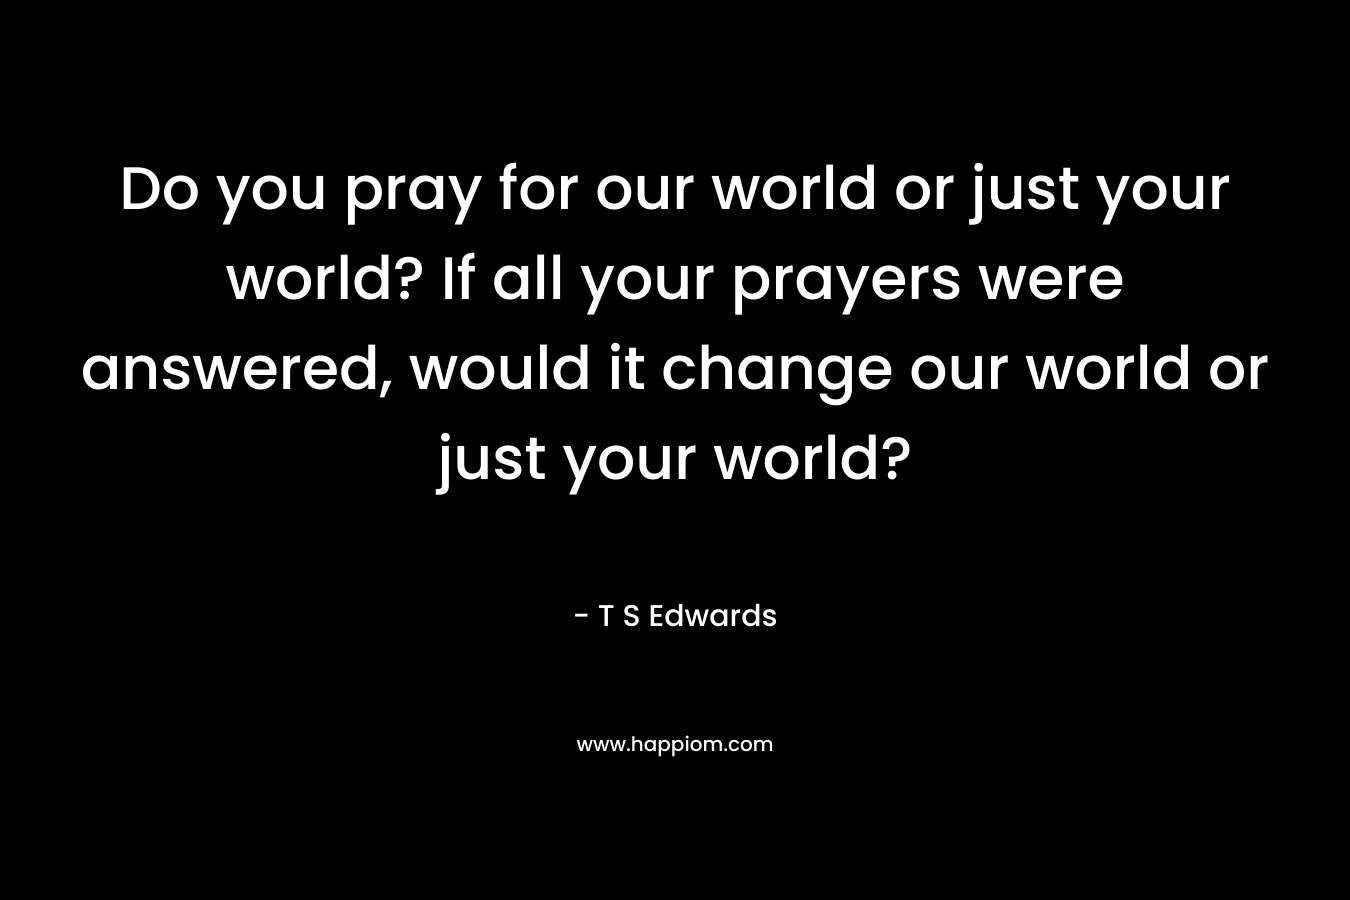 Do you pray for our world or just your world? If all your prayers were answered, would it change our world or just your world?